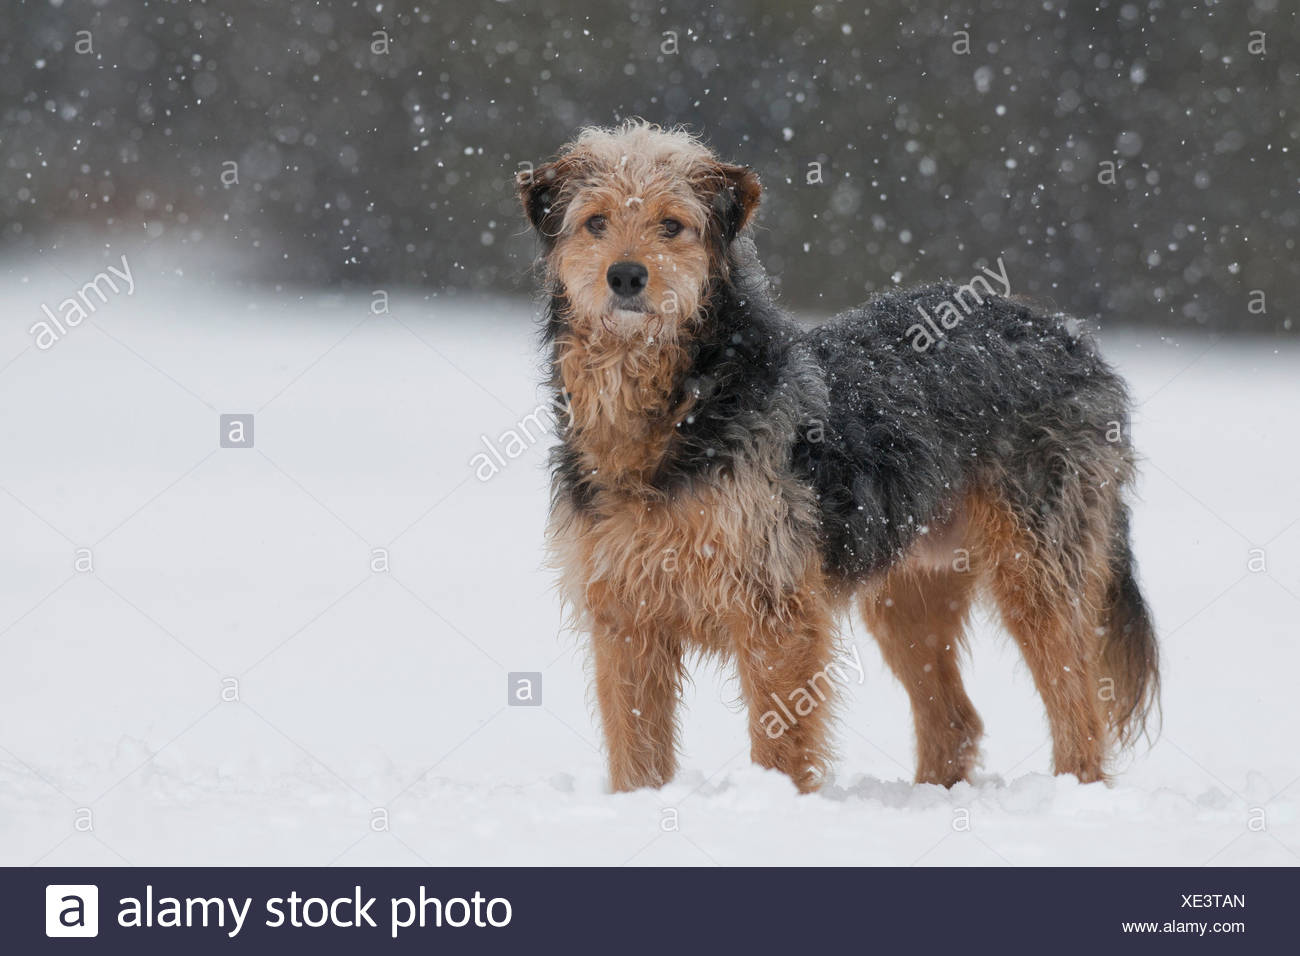 Bosnian Coarse Haired Hound Mongrel Standing In The Snow Stock Photo Alamy